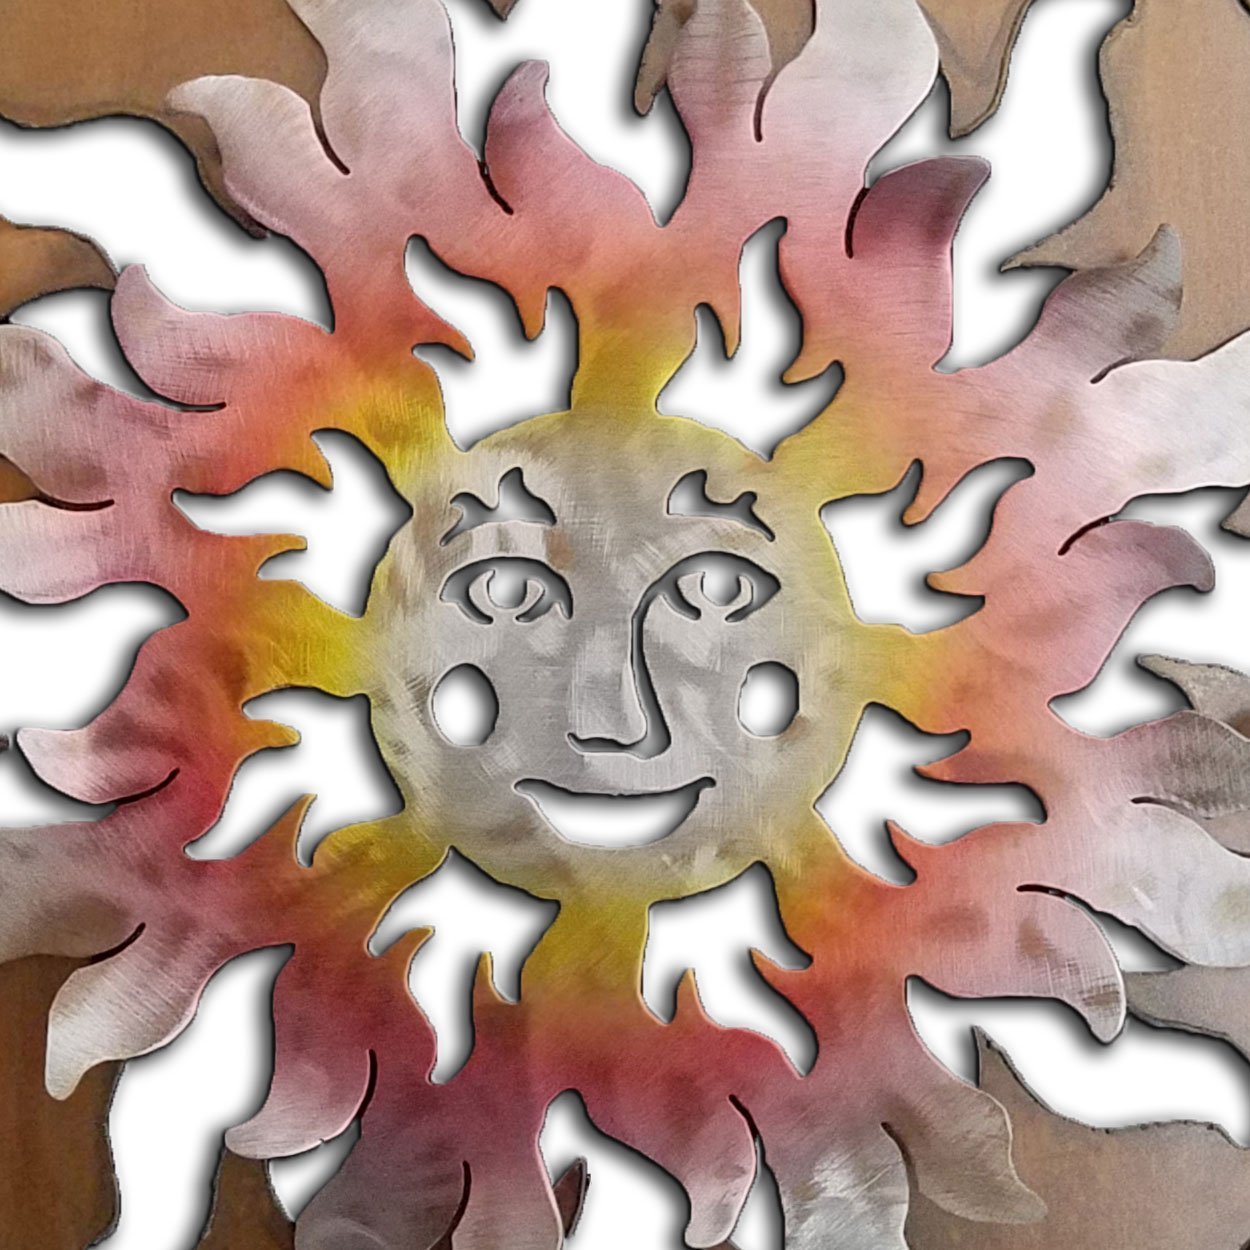 165371 - 13-inch small Happy Face Sun Panel 3D Metal Wall Art in a vibrant sunset swirl finish